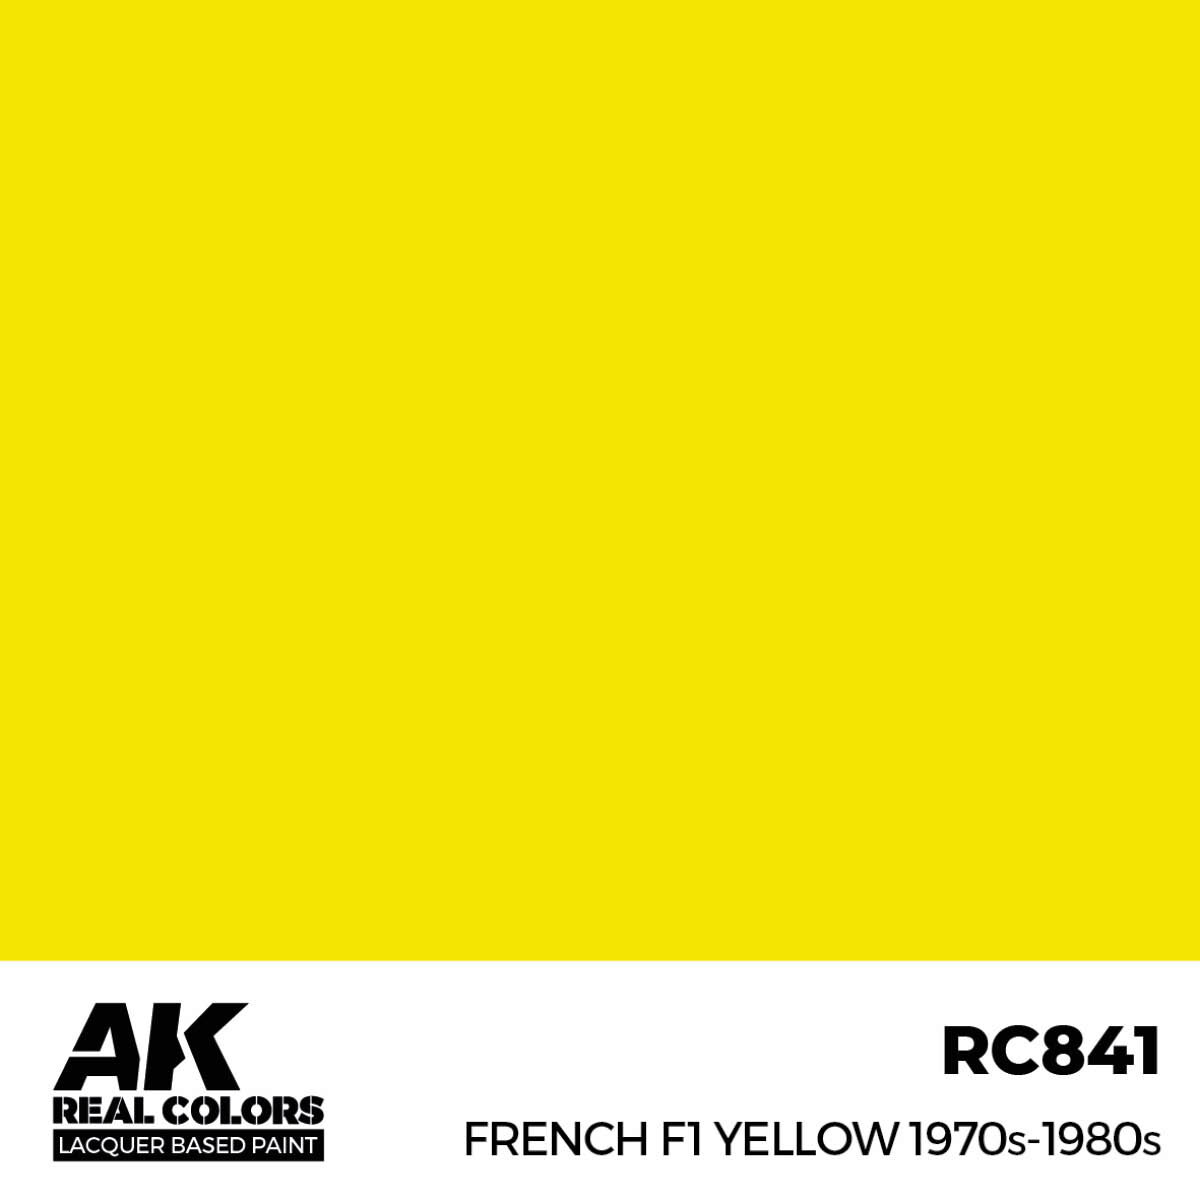 AK RC841 Real Colors French F1 Yellow 1970s-1980s 17ml.